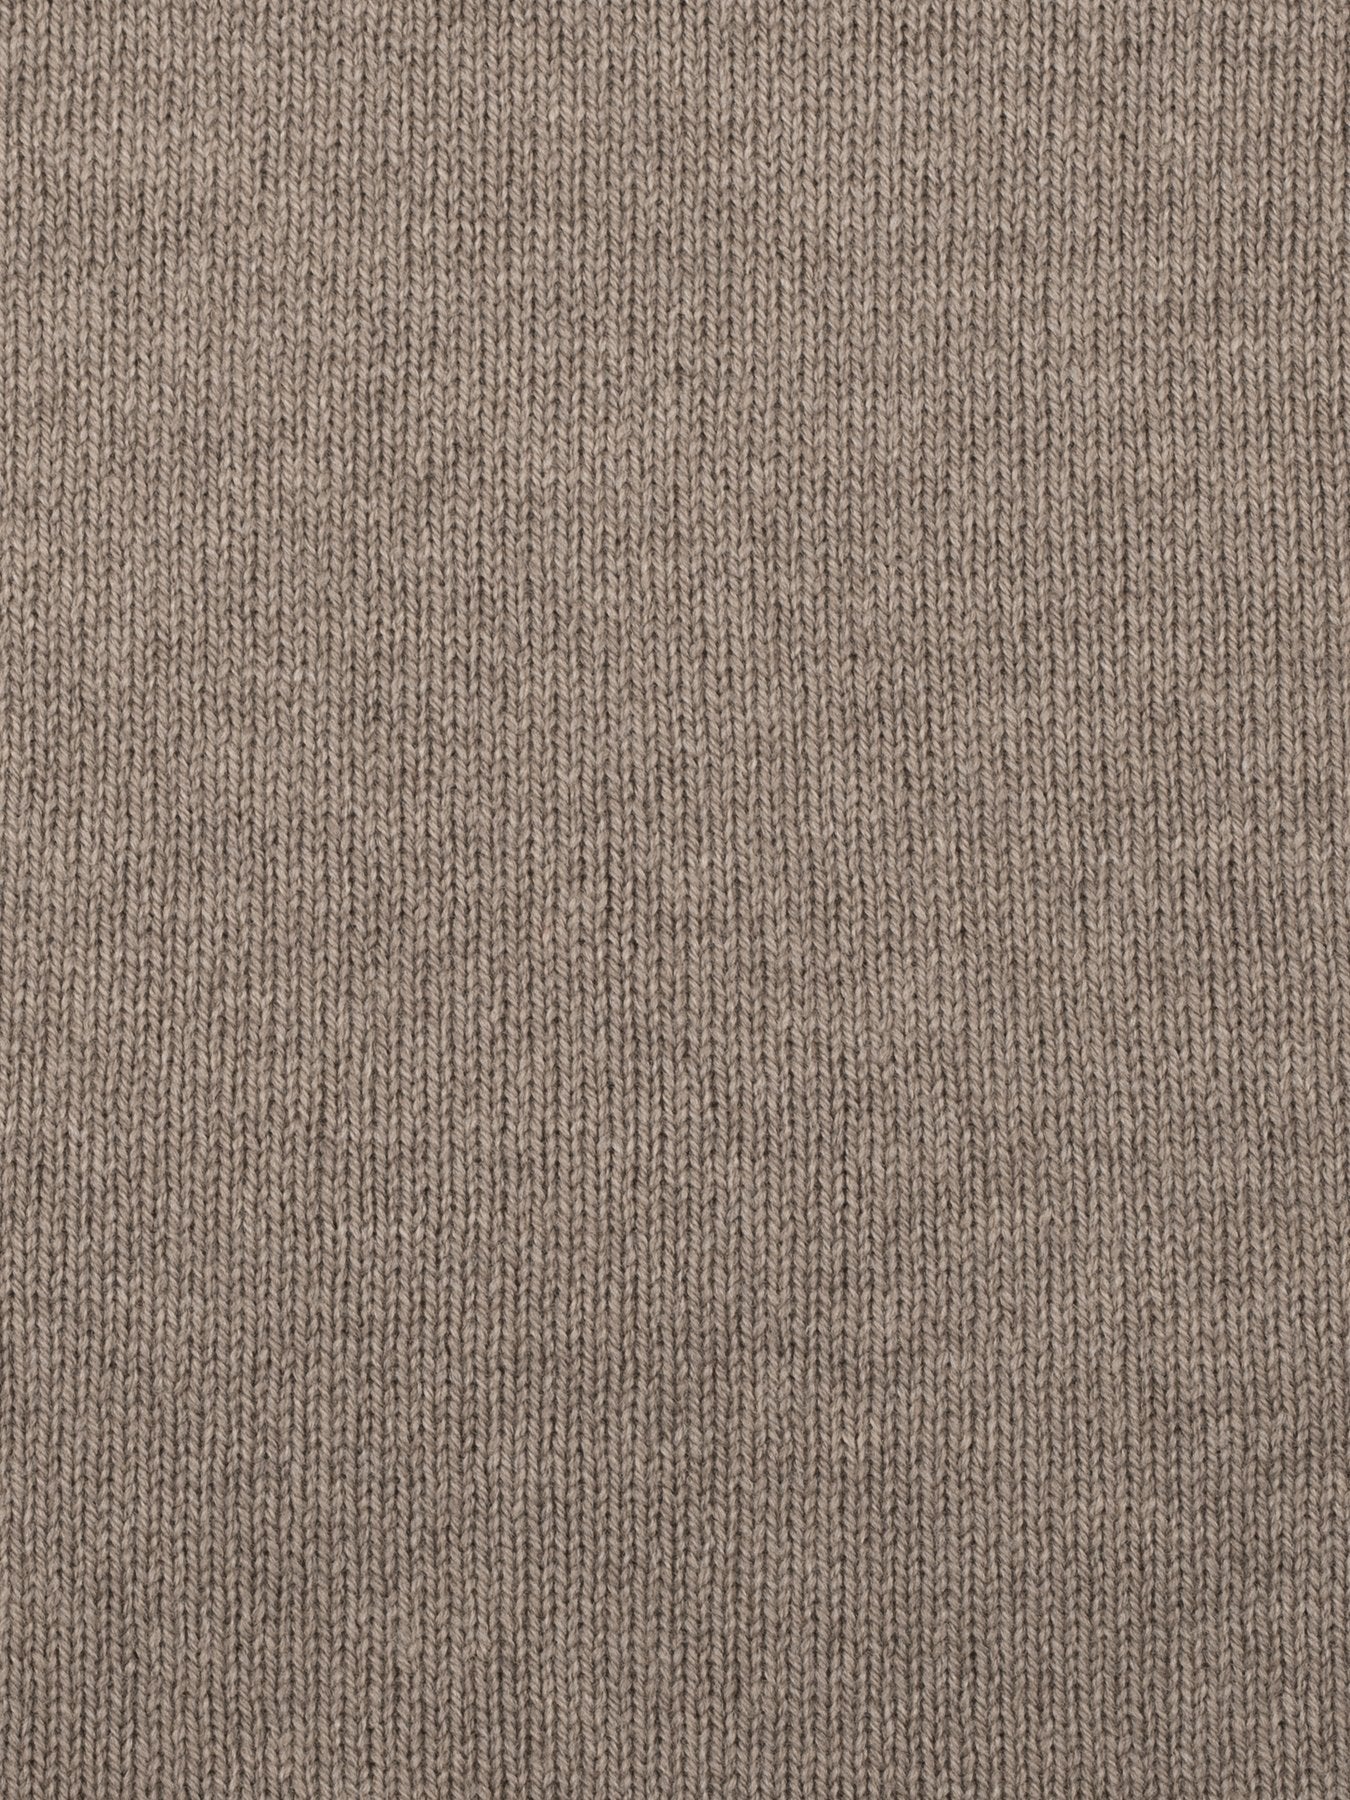 a swatch of plain single jersey knitting made from fine merino wool in a medium brown colour